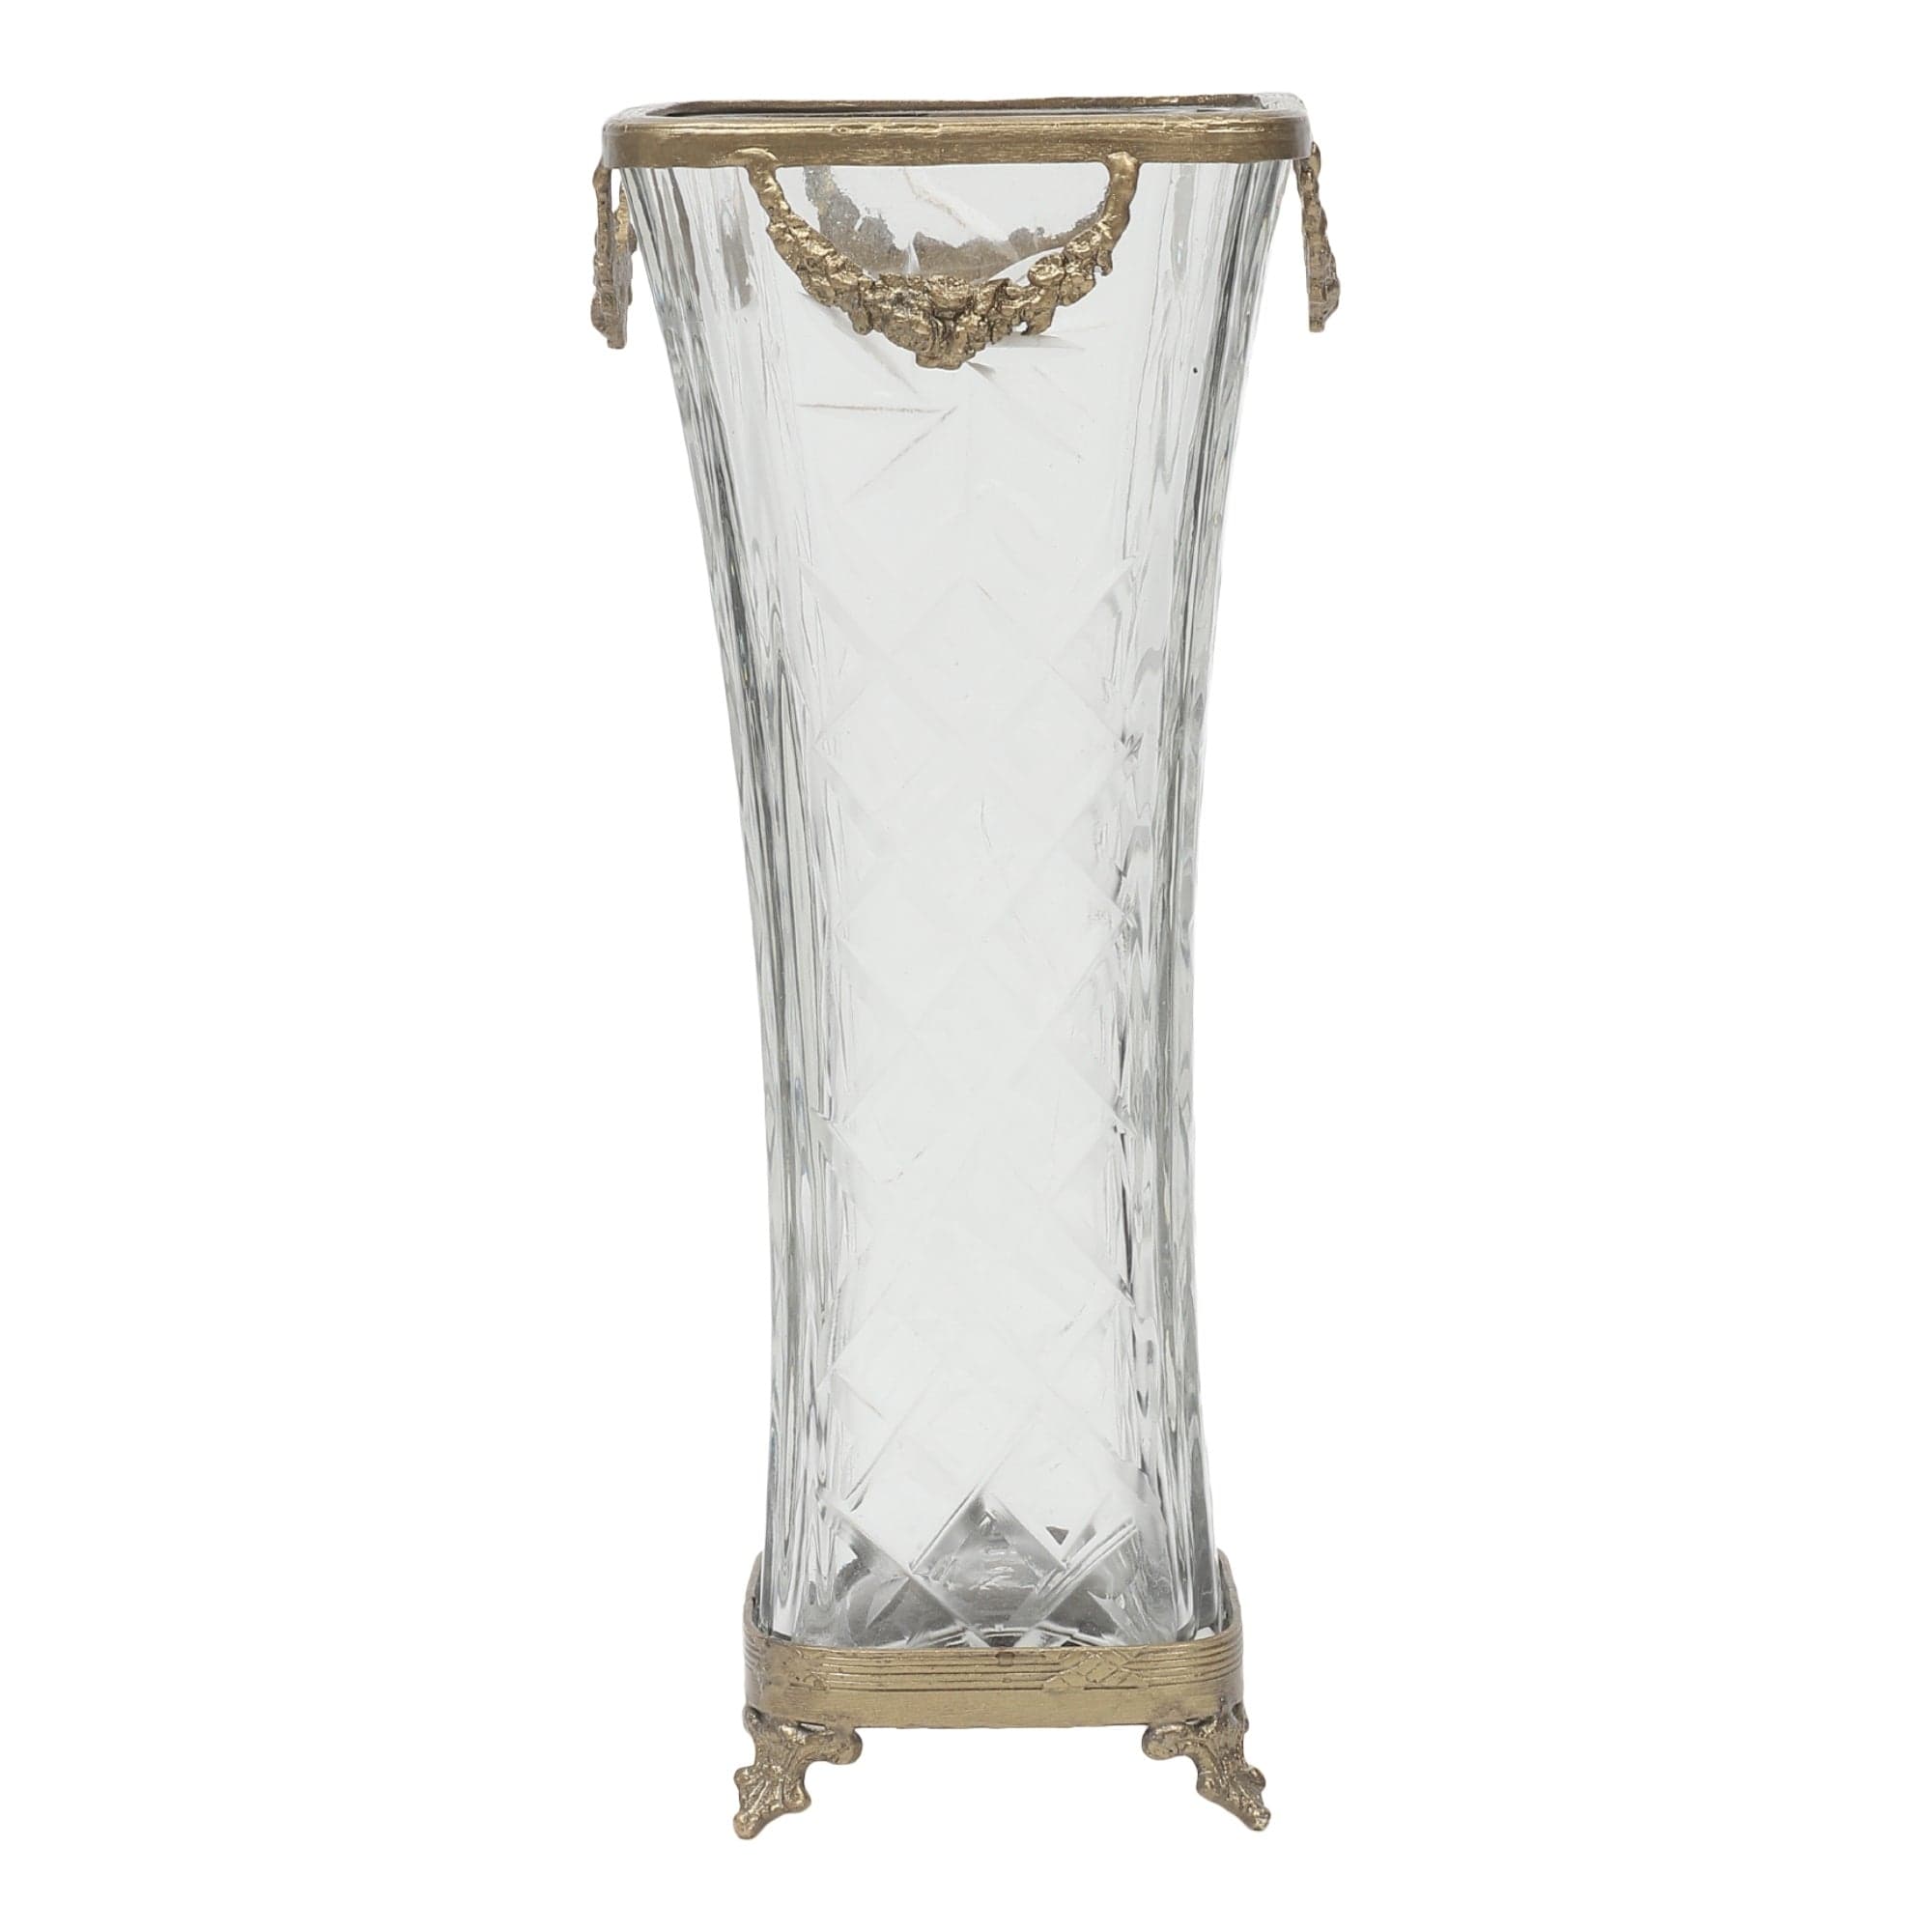 Diamond Blossom Glass Vase with antique brass rings